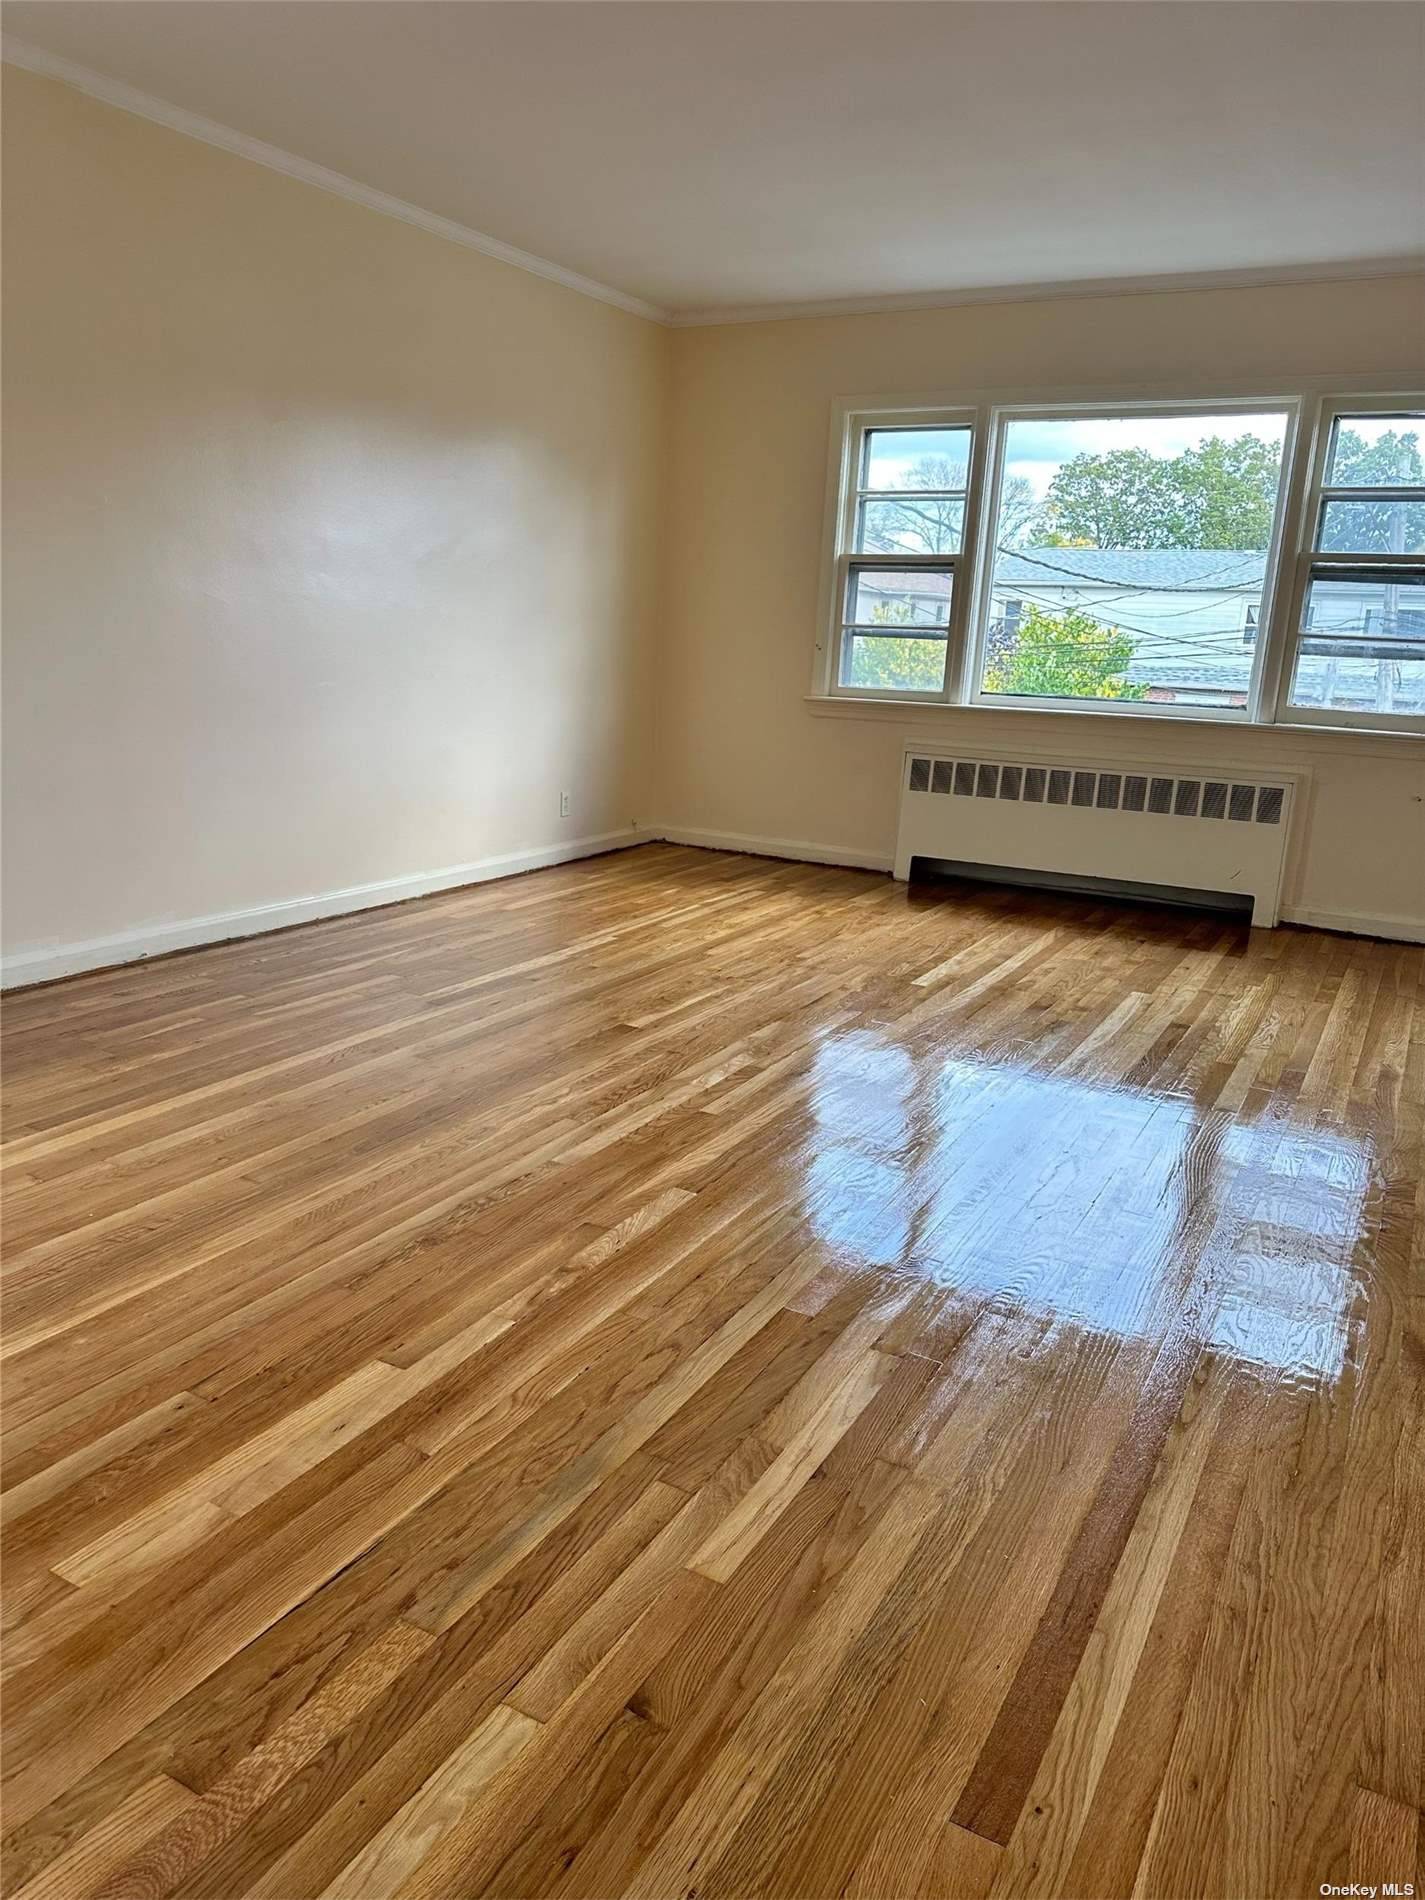 Conveniently located in the heart of Queens Village and SD 26, this newly renovated 2nd Floor rental apartment offers 3 spacious bedrooms with 1 bathroom.